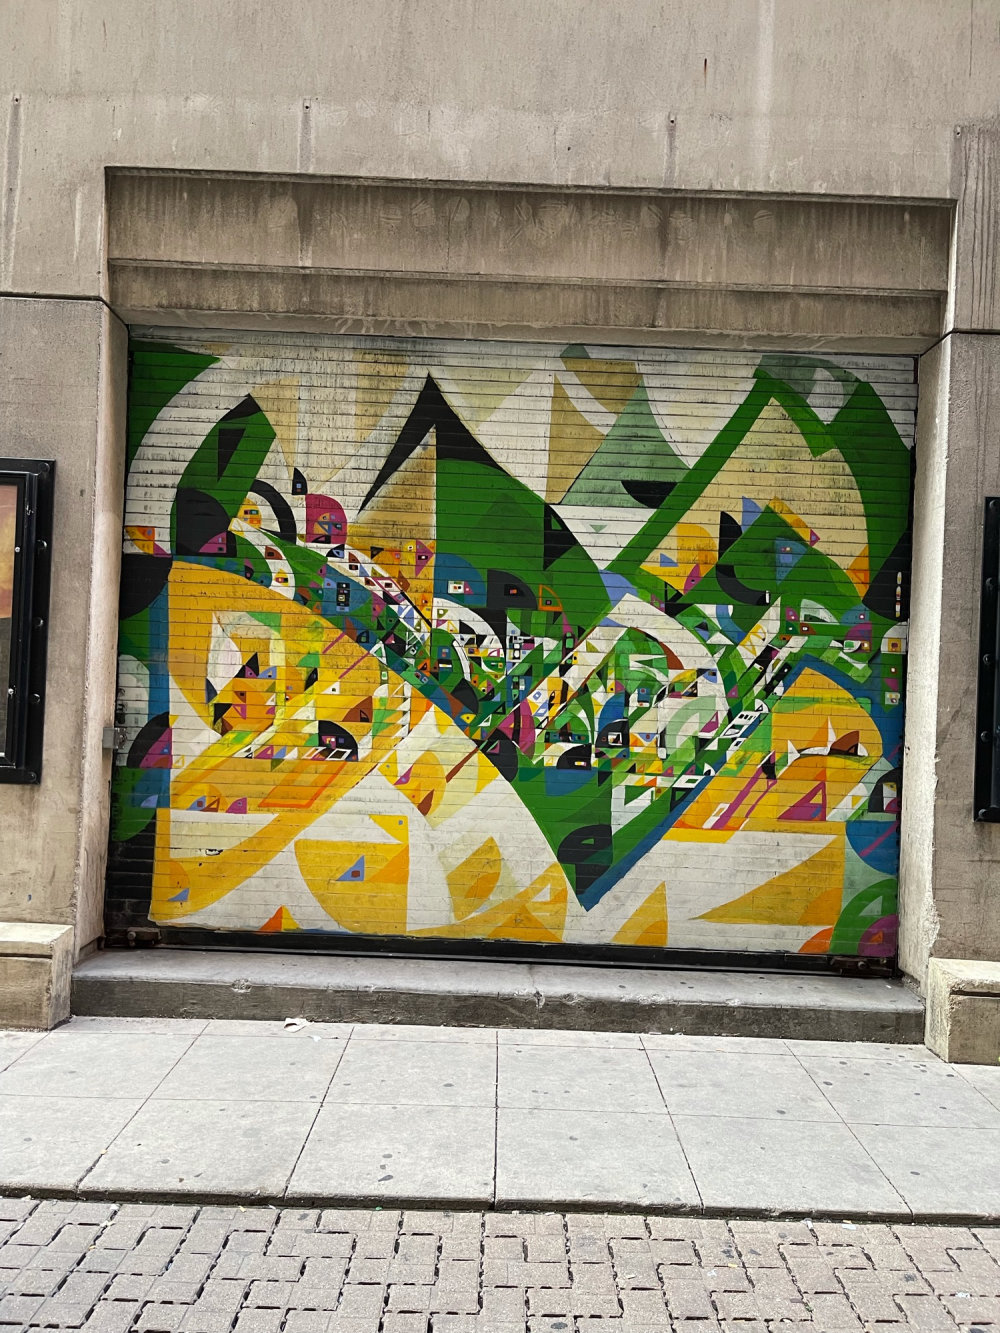 mural in Chicago by artist Justus Roe.